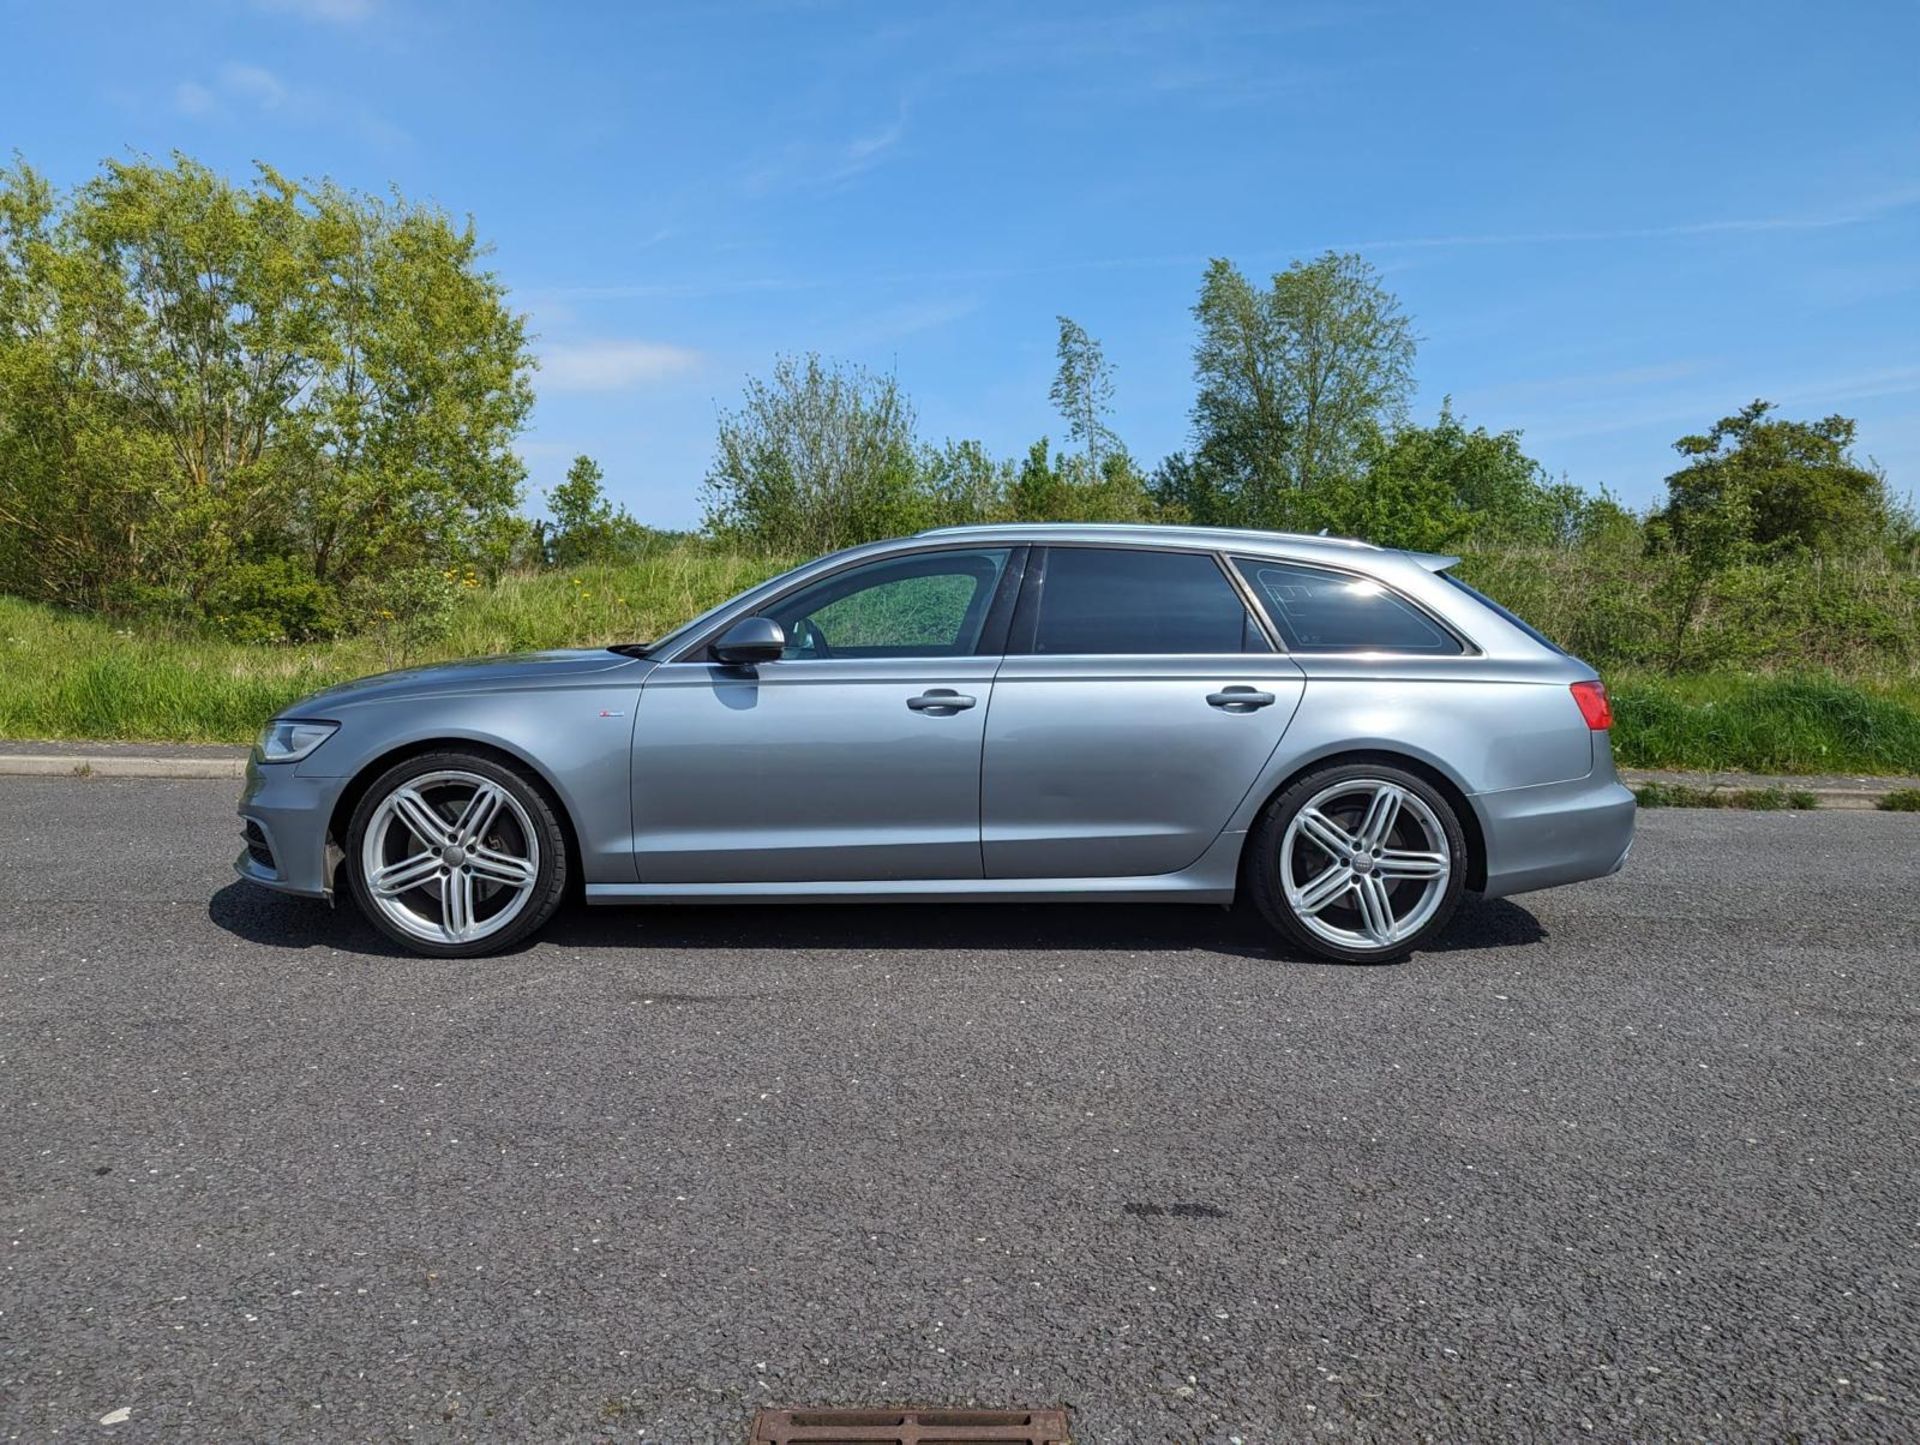 2012/61 REG AUDI A6 S LINE TDI 3.0 DIESEL QUATTRO AUTOMATIC GREY ESTATE, SHOWING 3 FORMER KEEPERS - Image 5 of 49